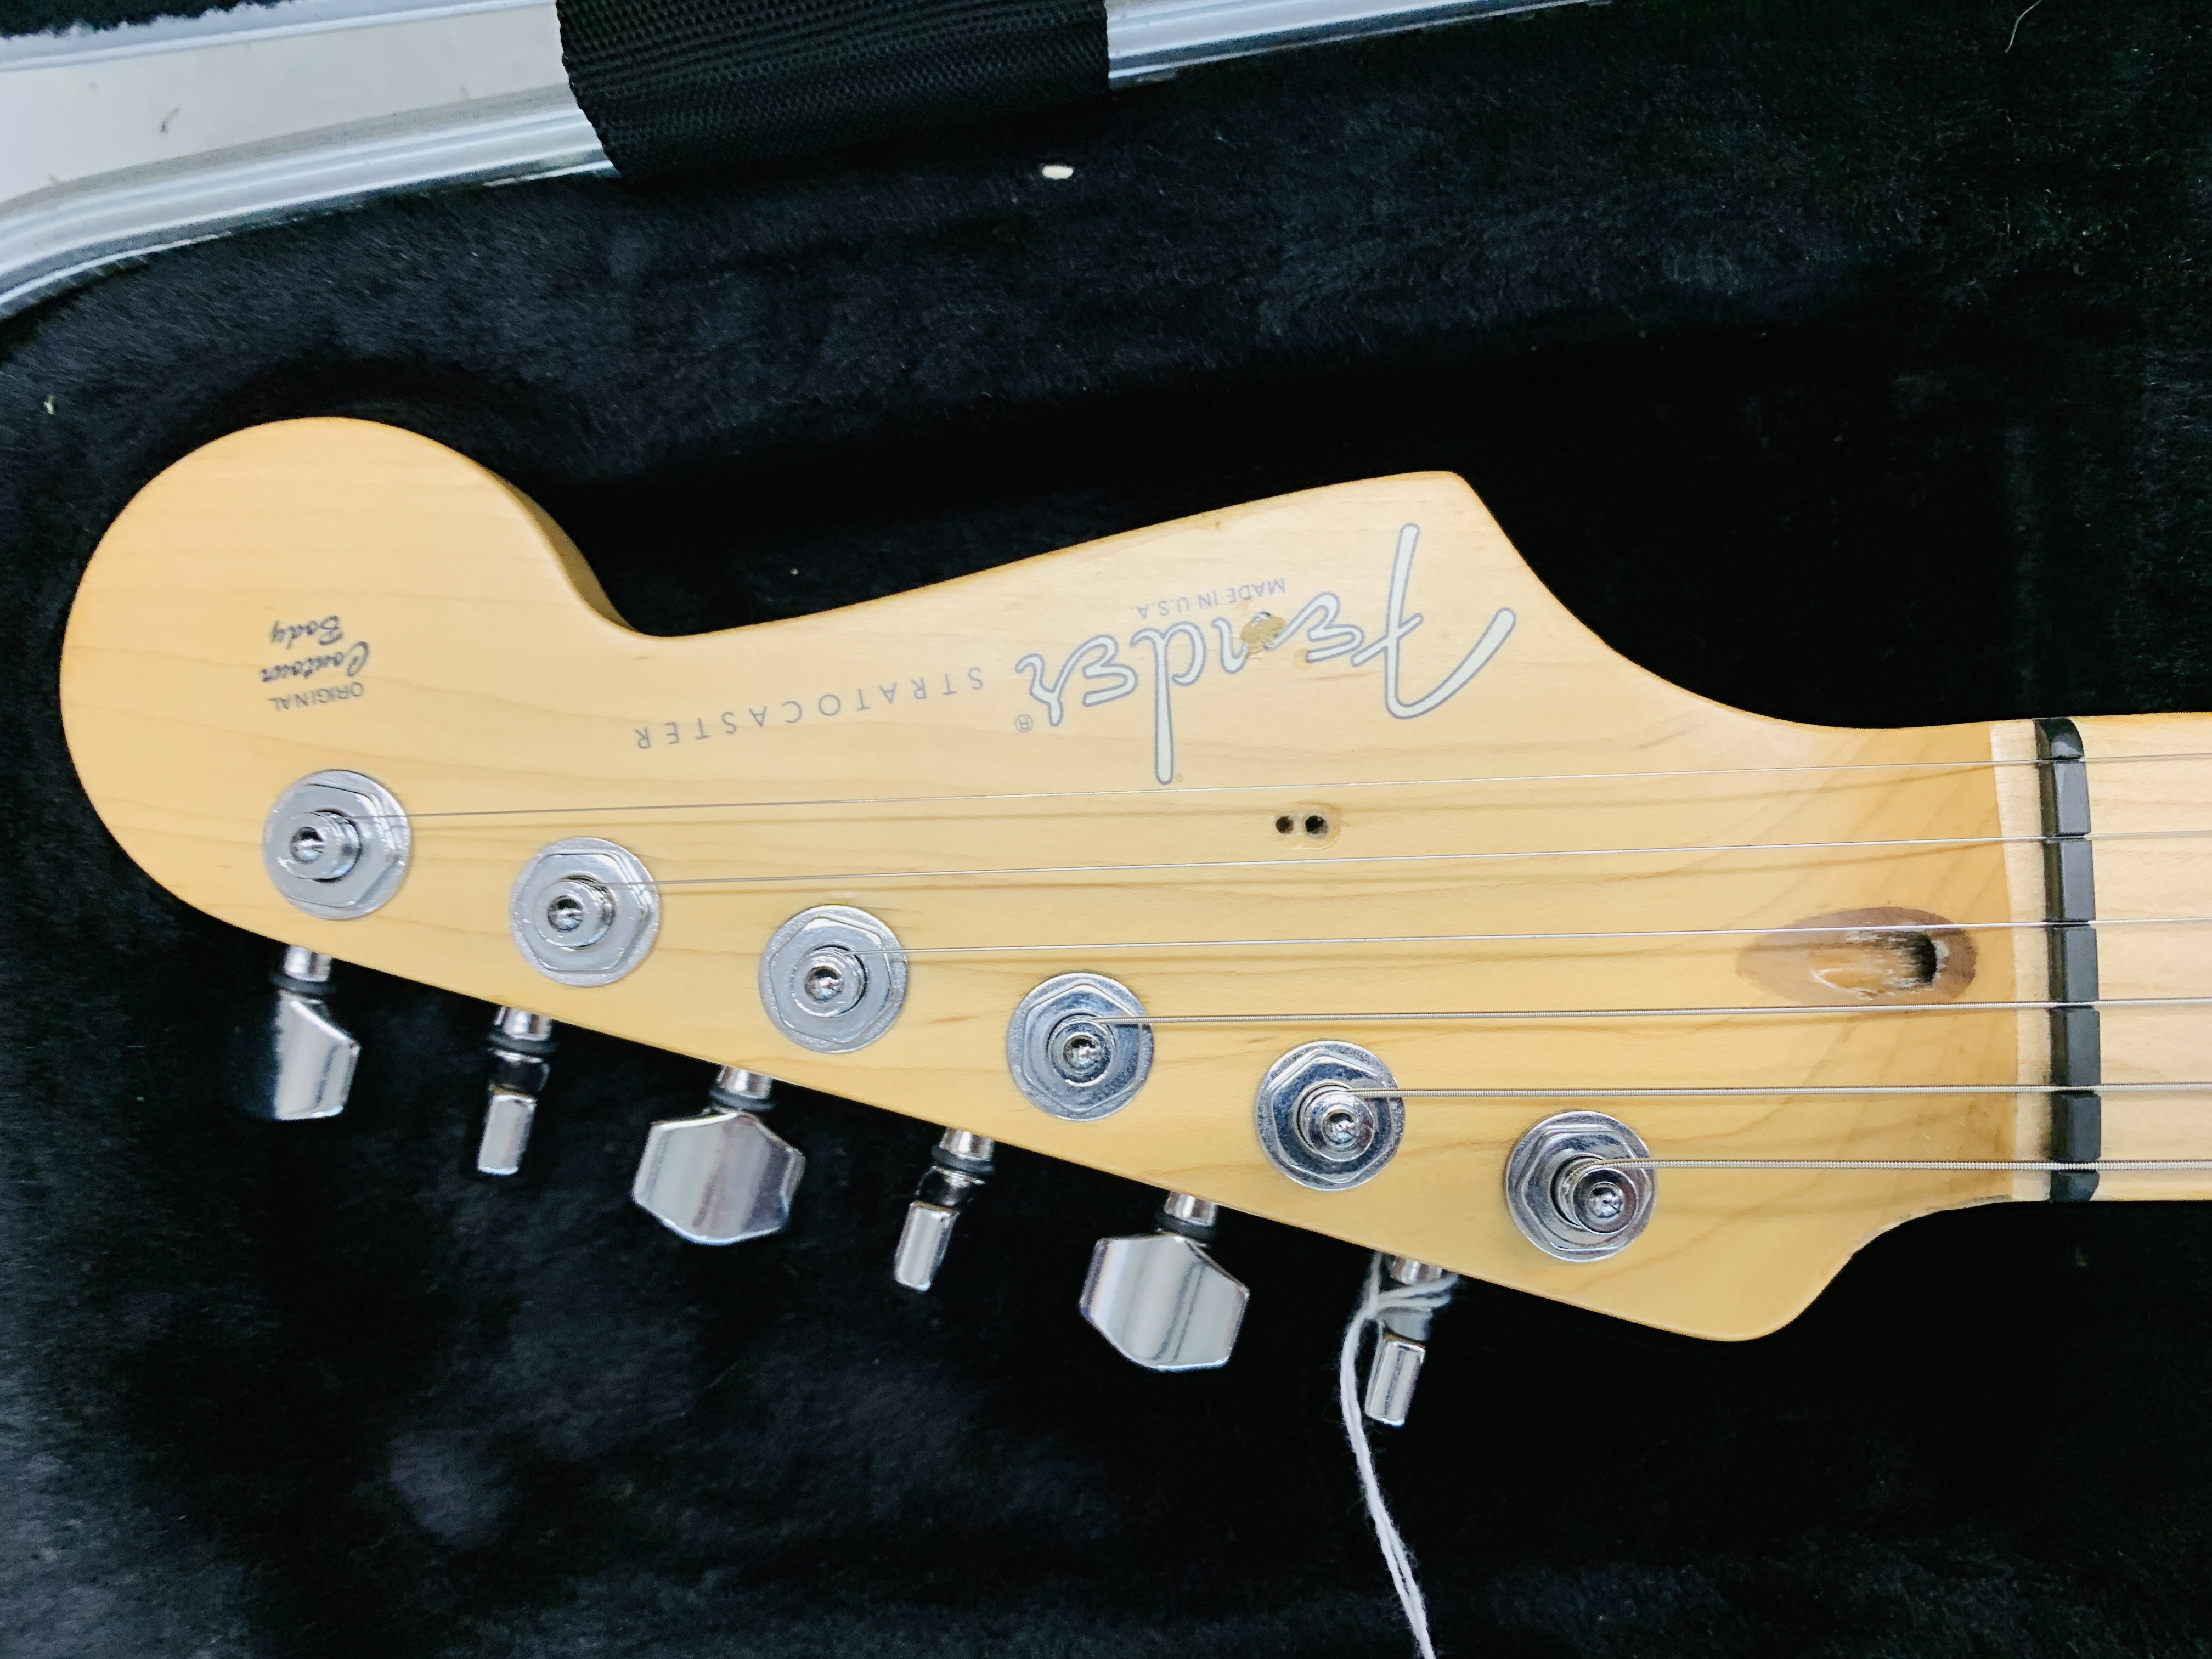 1 X UPGRADED USA FENDER STRATOCASTER GUITAR. - Image 4 of 10